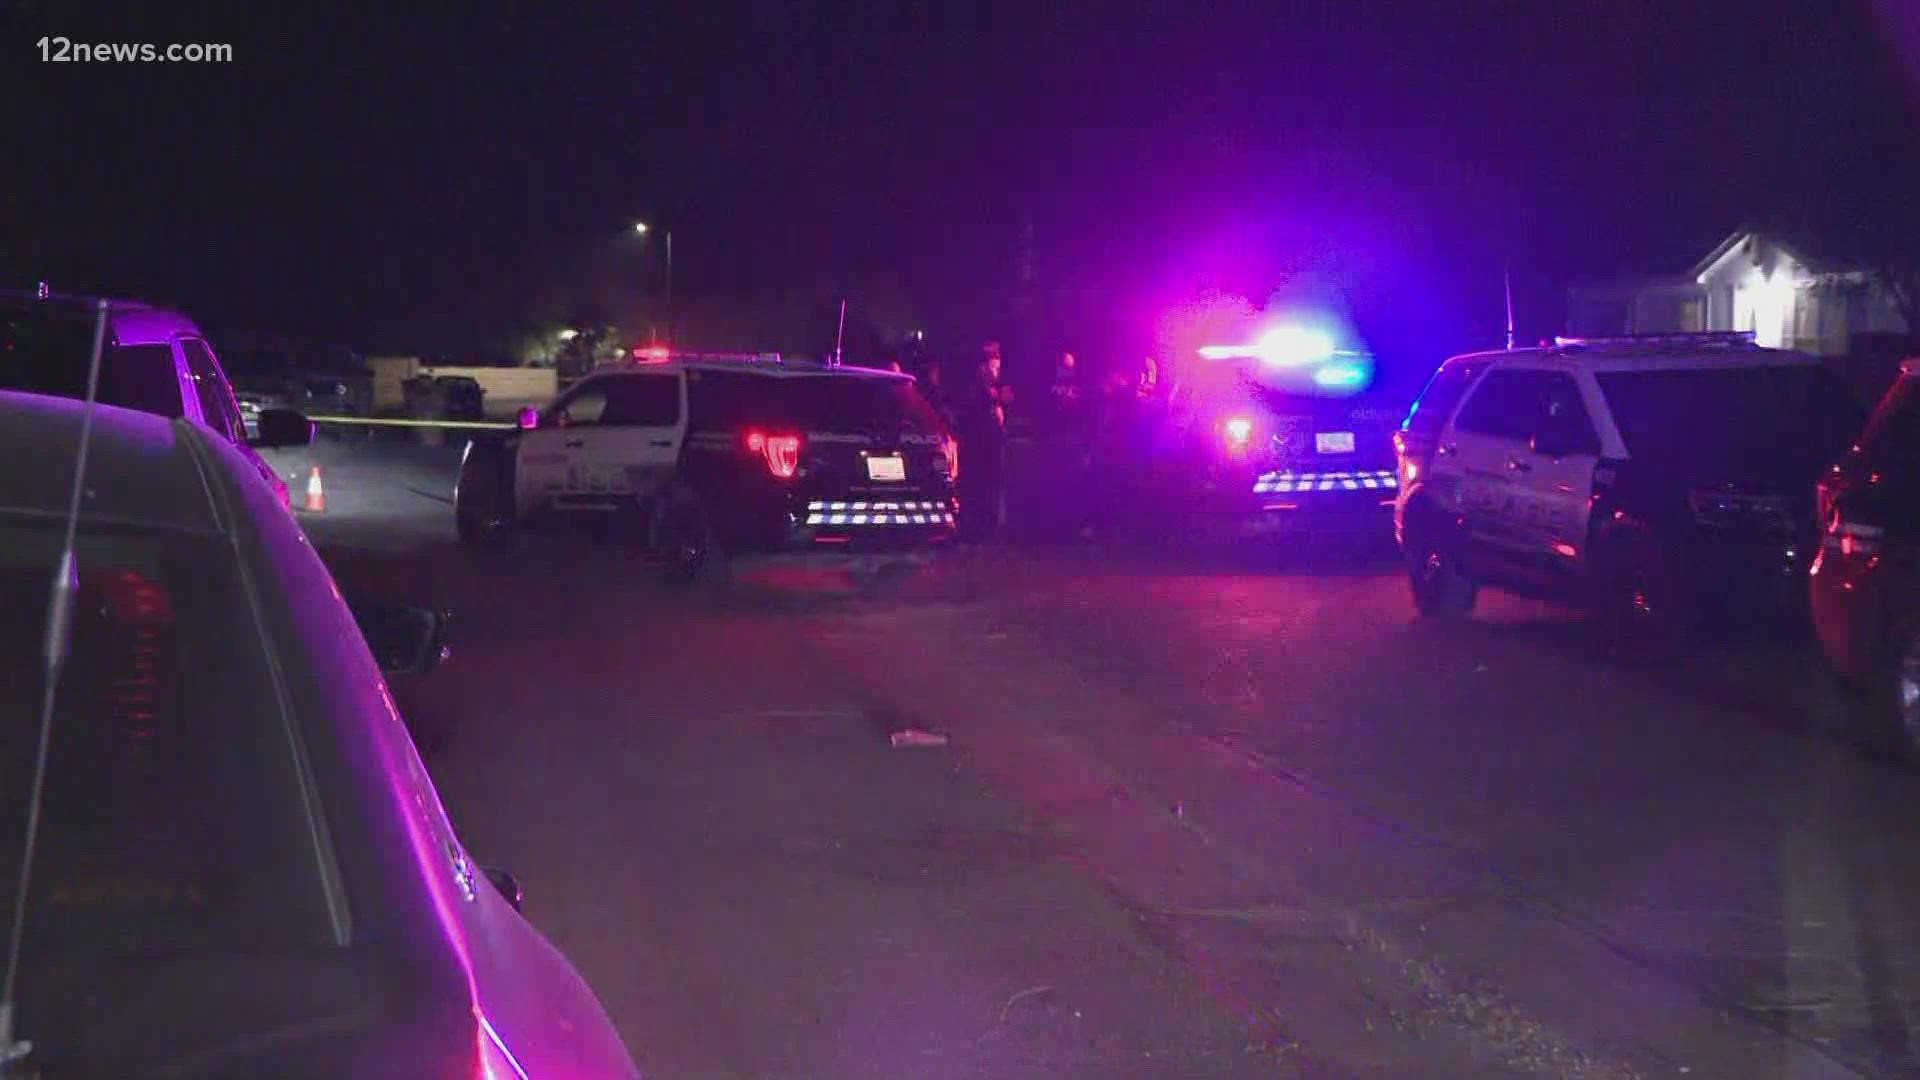 Two teenage boys were hospitalized after a drive-by shooting happened in Maricopa on Monday night.